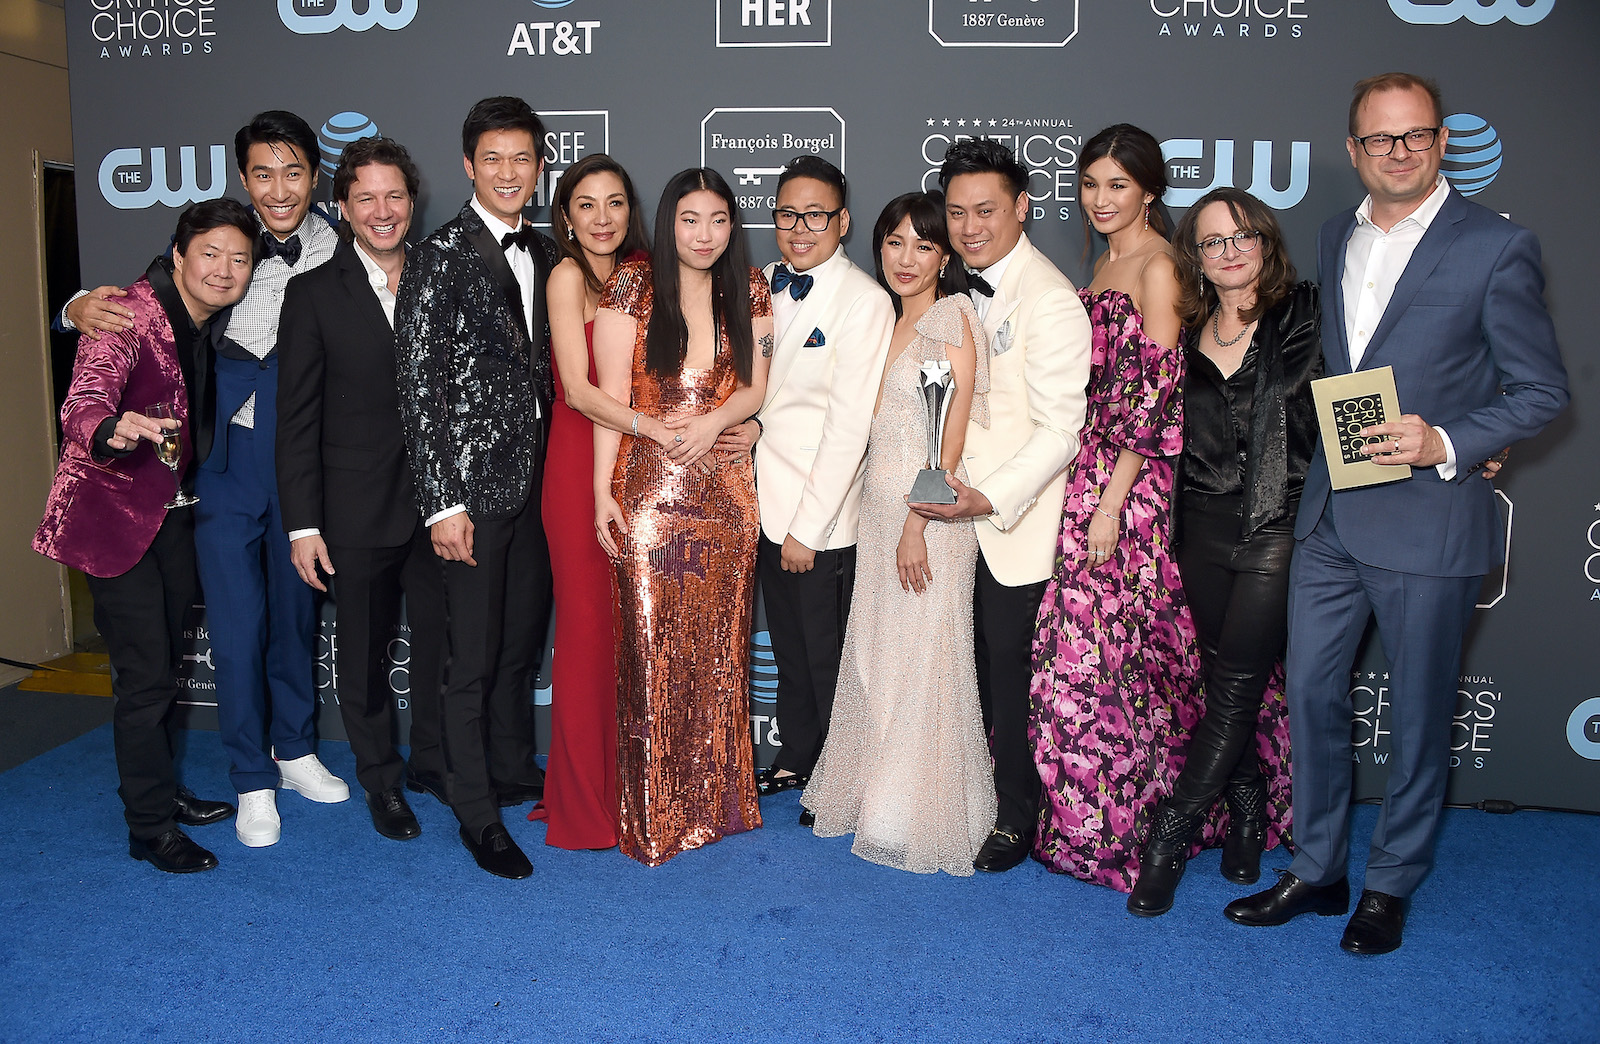 ‘Crazy Rich Asians’ Fans Will Love HBO’s ‘House of Ho’